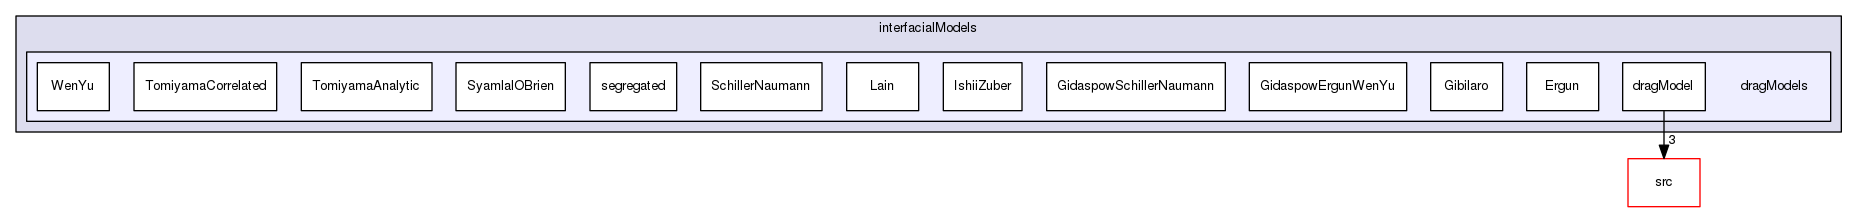 applications/solvers/multiphase/twoPhaseEulerFoam/interfacialModels/dragModels